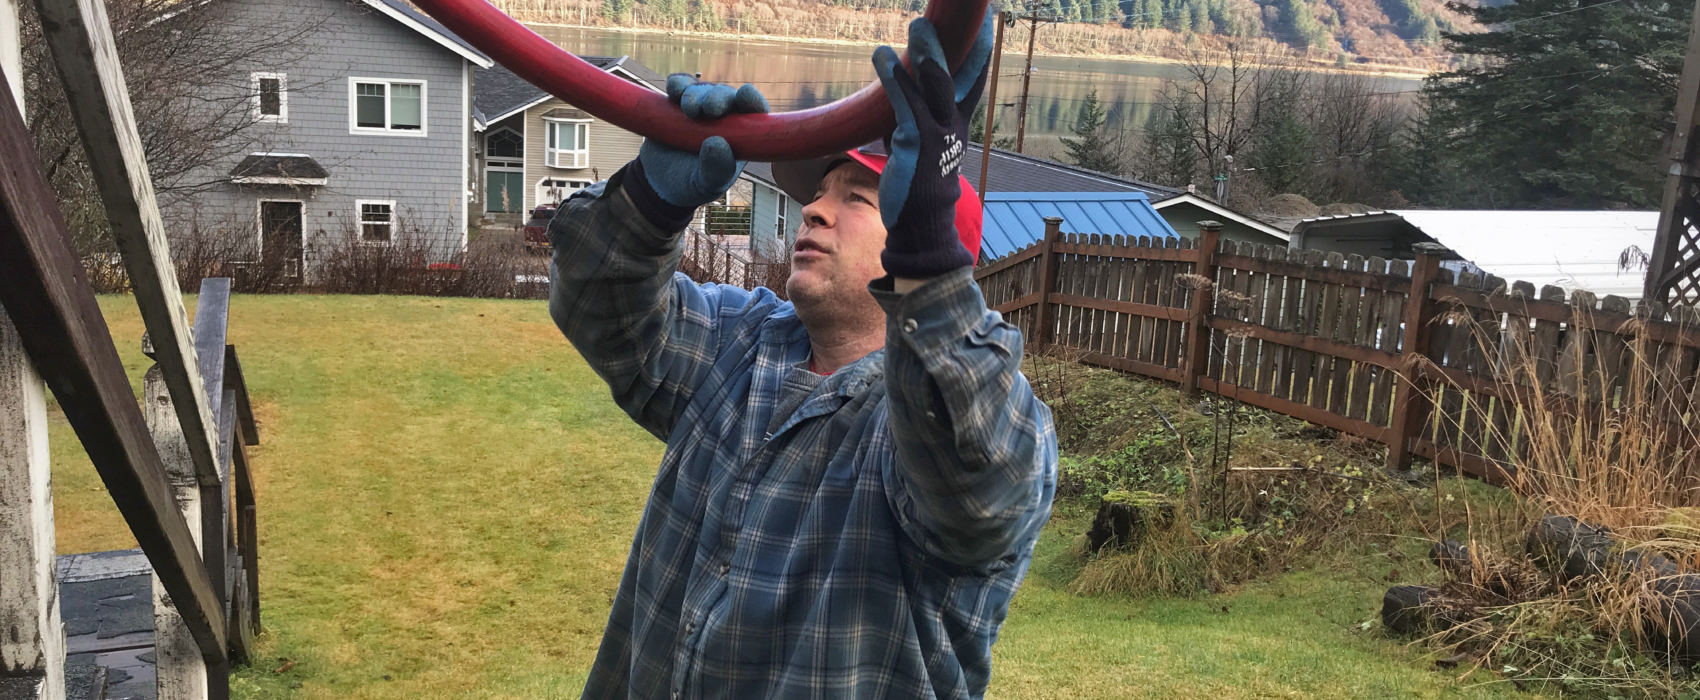 Phil Isaak, of Ike's Fuel finishes topping off a heating oil tank on November 15, 2018, in Juneau, Alaska. Isaak says costs in Alaska don't really match up well with heating fuel costs in the rest of the country. (Photo by Rashah McChesney/Alaska's Energy Desk)